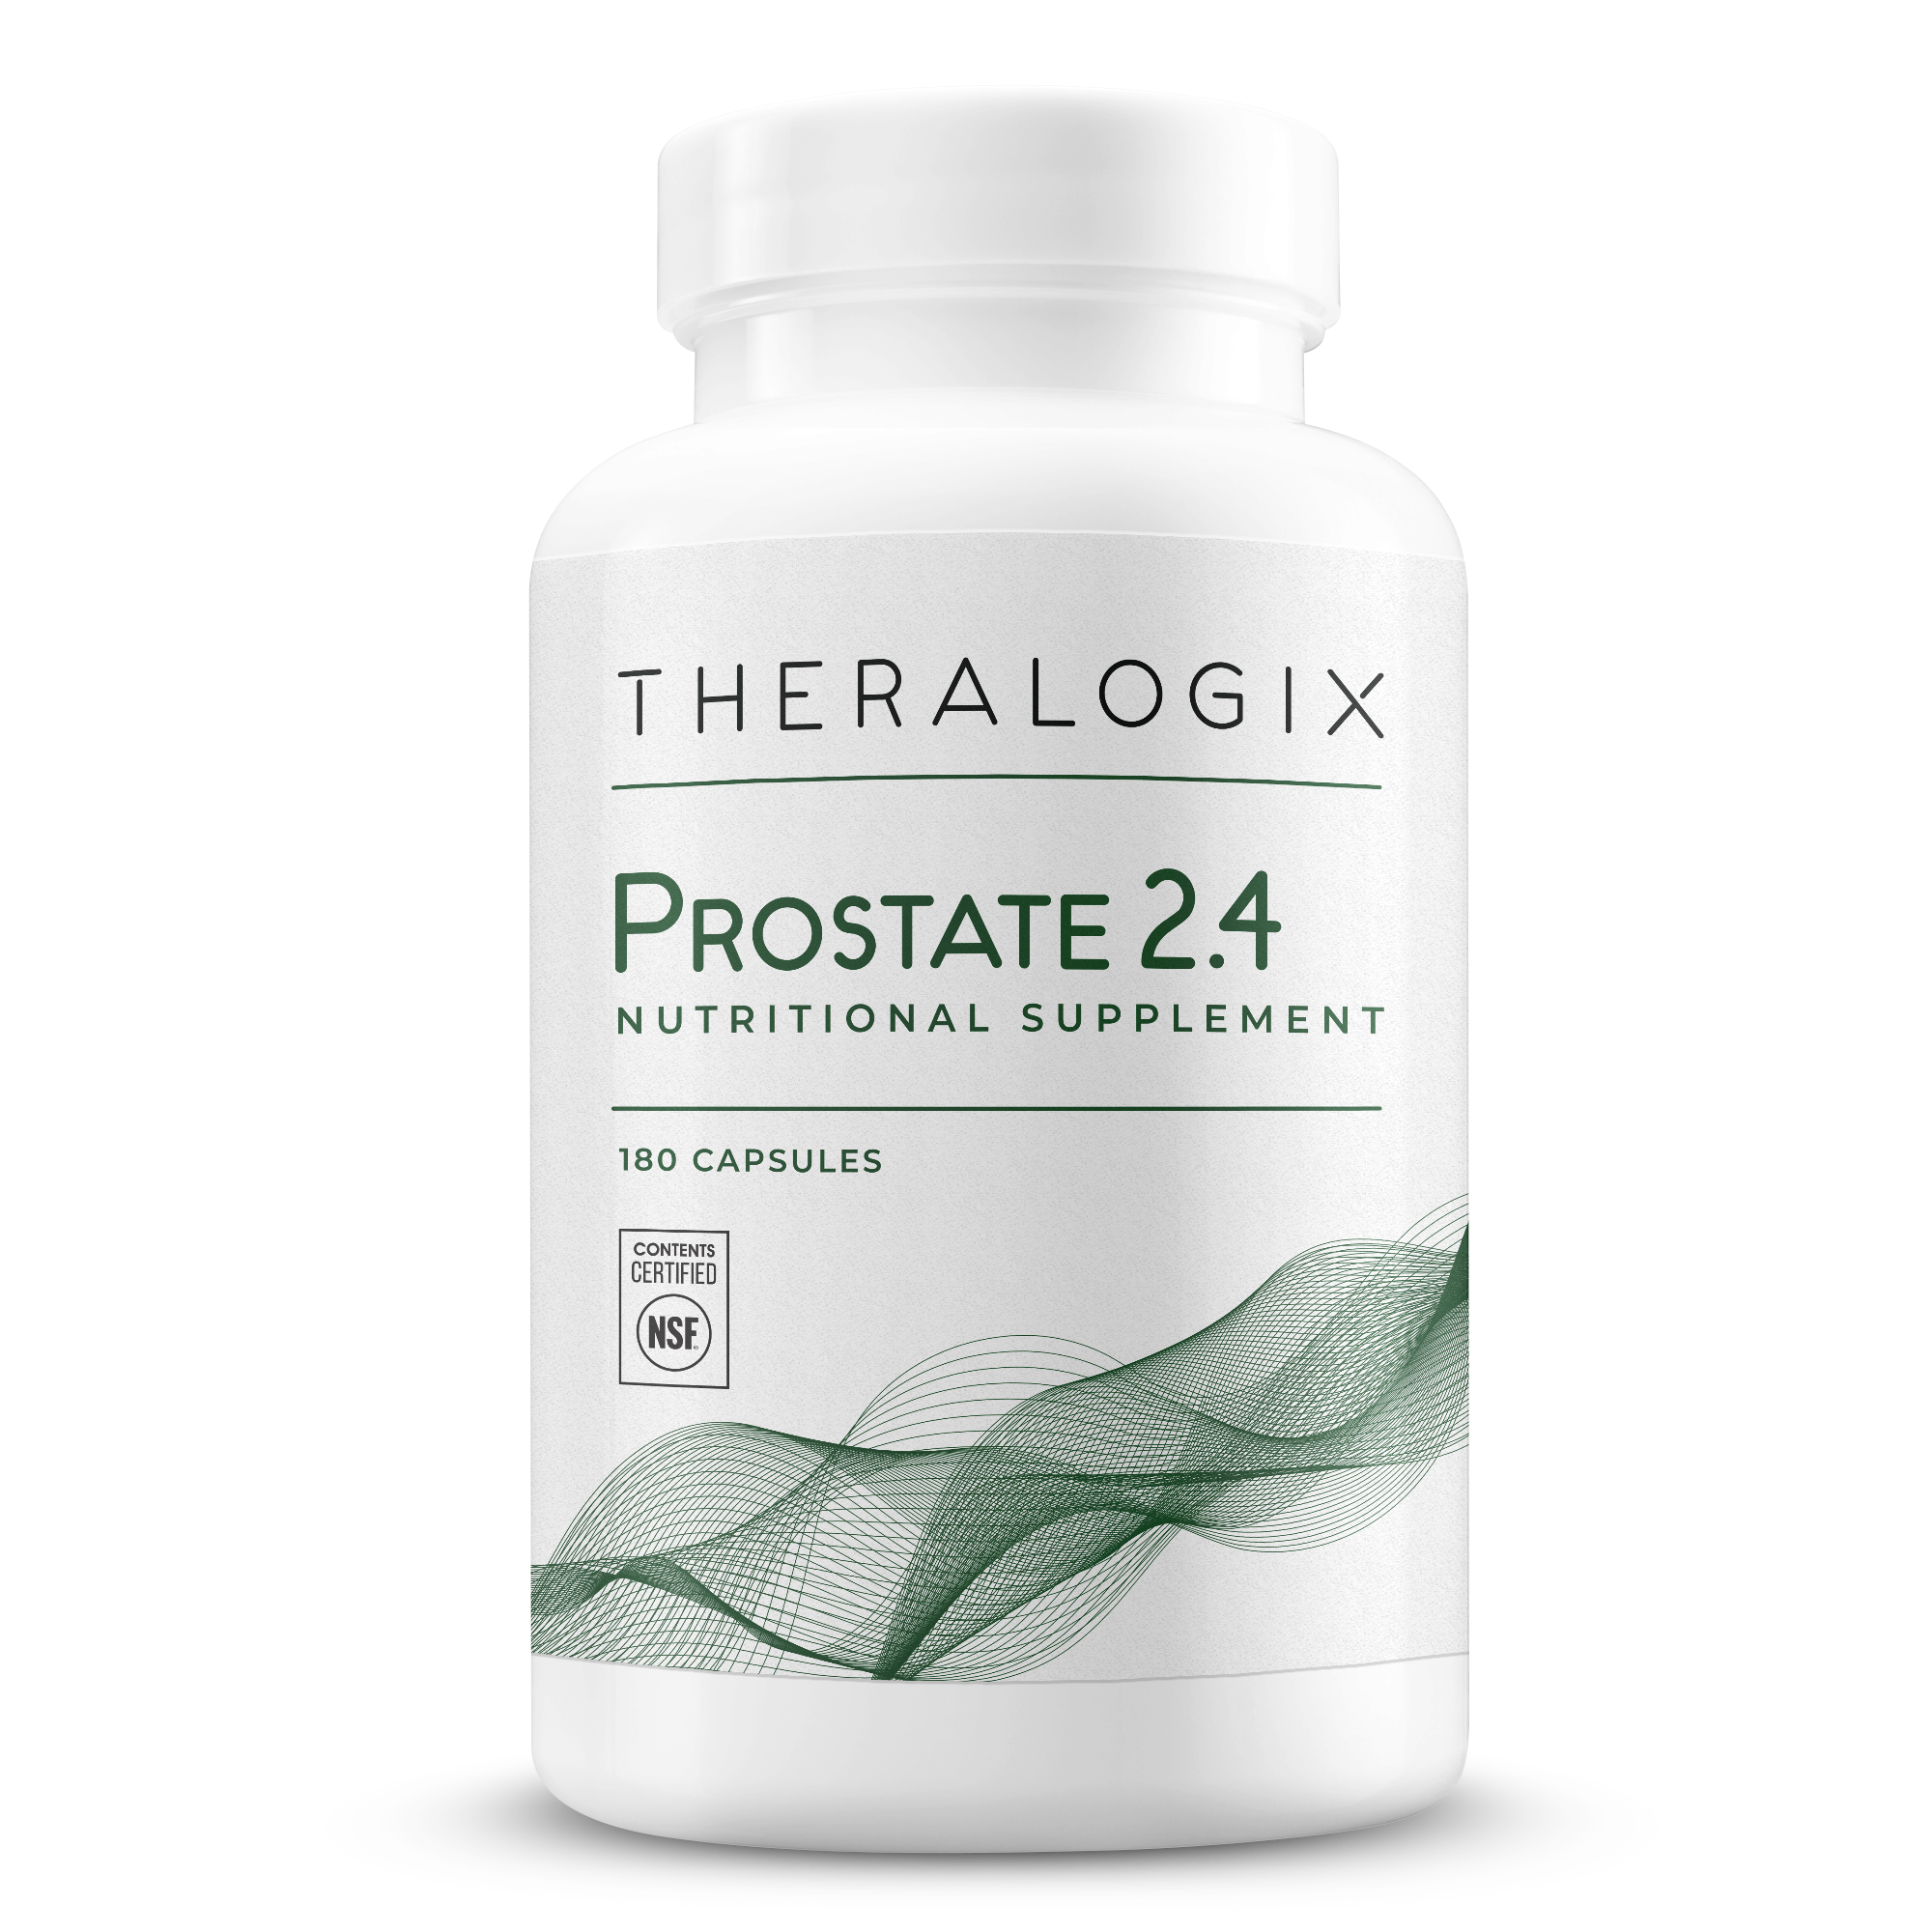 Prostate 2.4 Nutritional Supplement